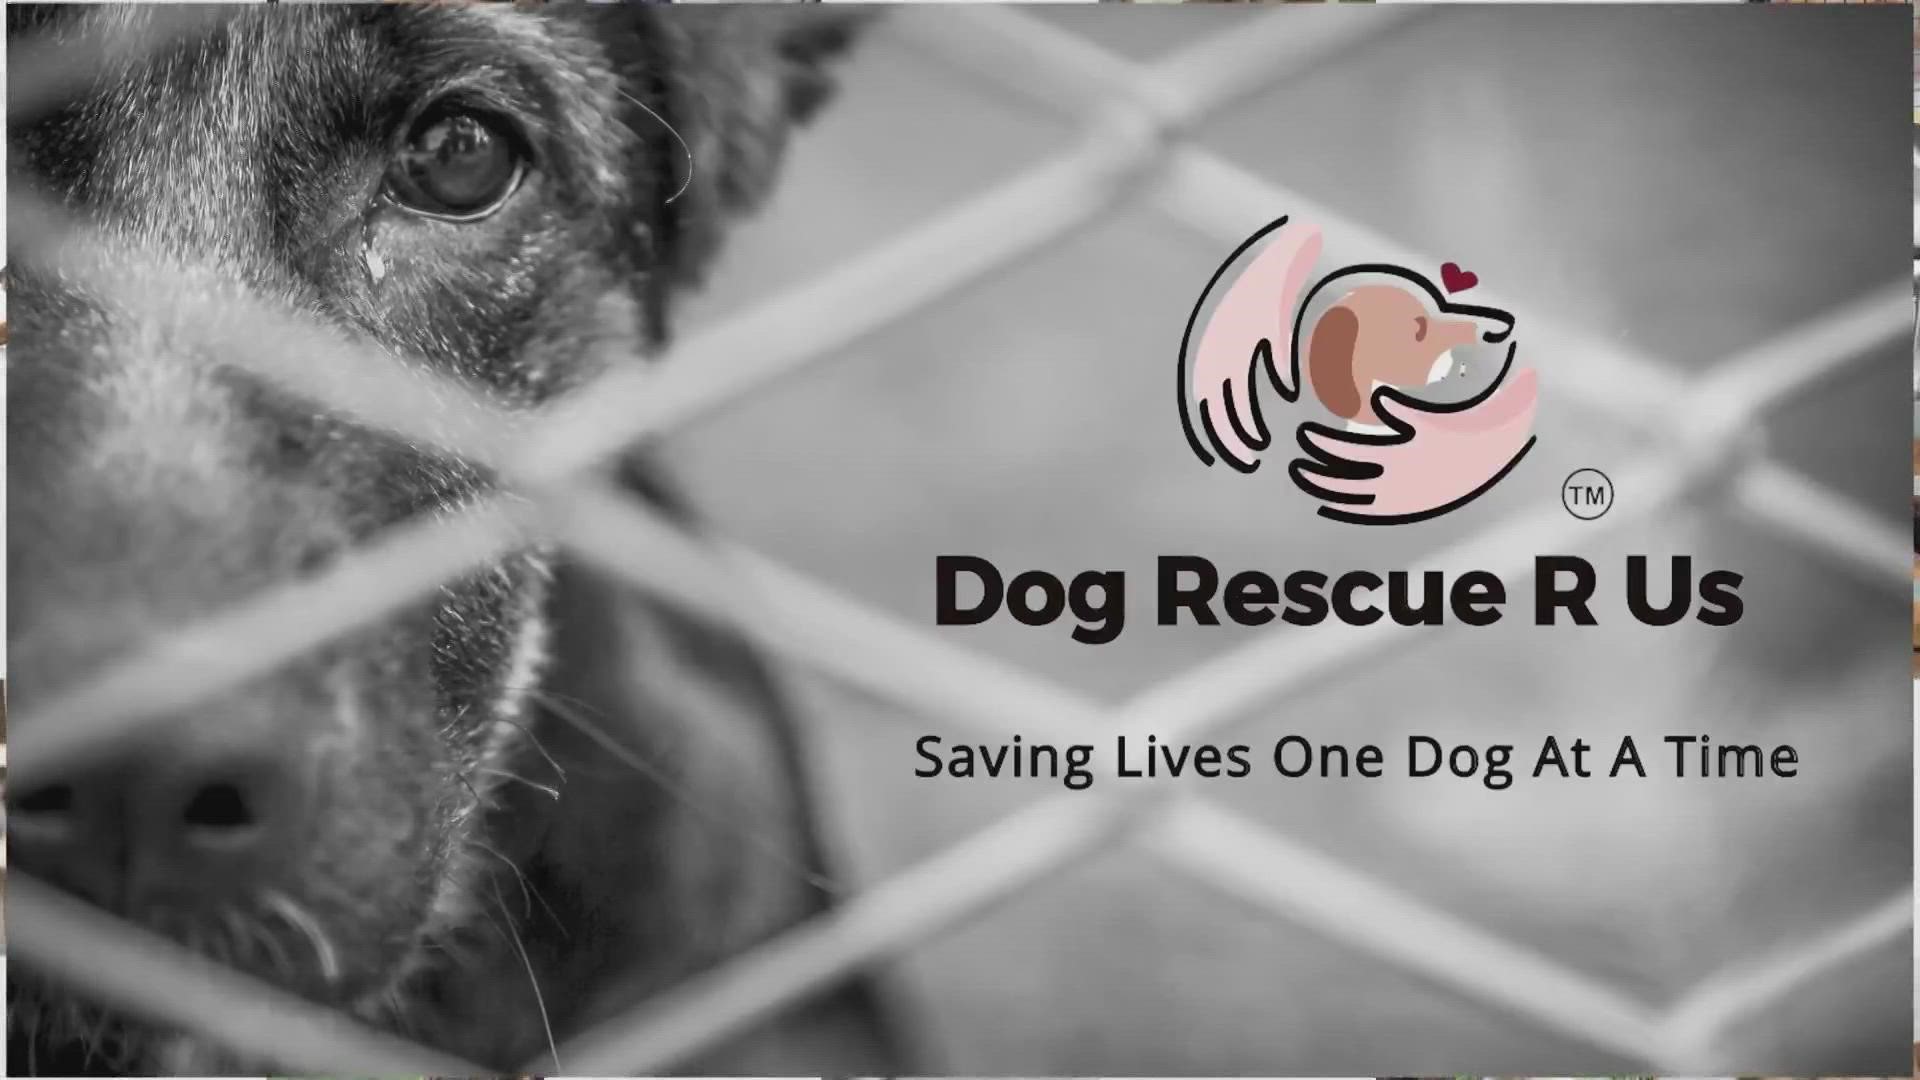 "These dogs get to get loaded up and within hours they are starting their new lives," said Dolly Hinsz, Director of Operations for Dogs Rescue R us.